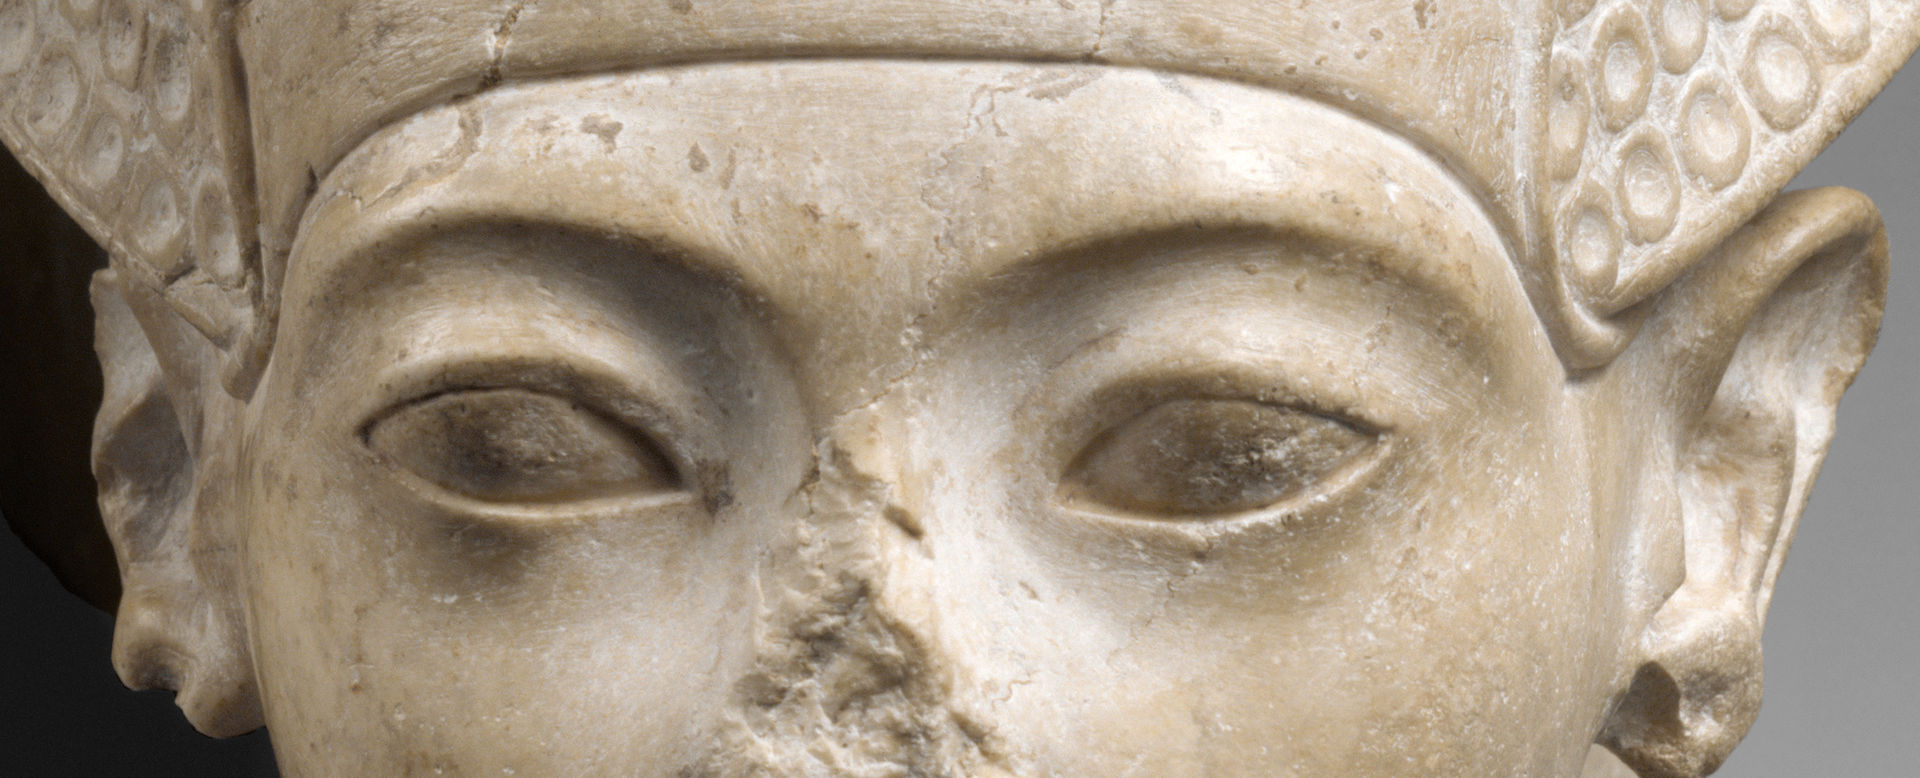 A close-up of a face, focused on the eyes, which are almond-shaped. Part of the area of the nose, which was broken away,  is visible, Above the eyes is the band of a helmet-like crown.